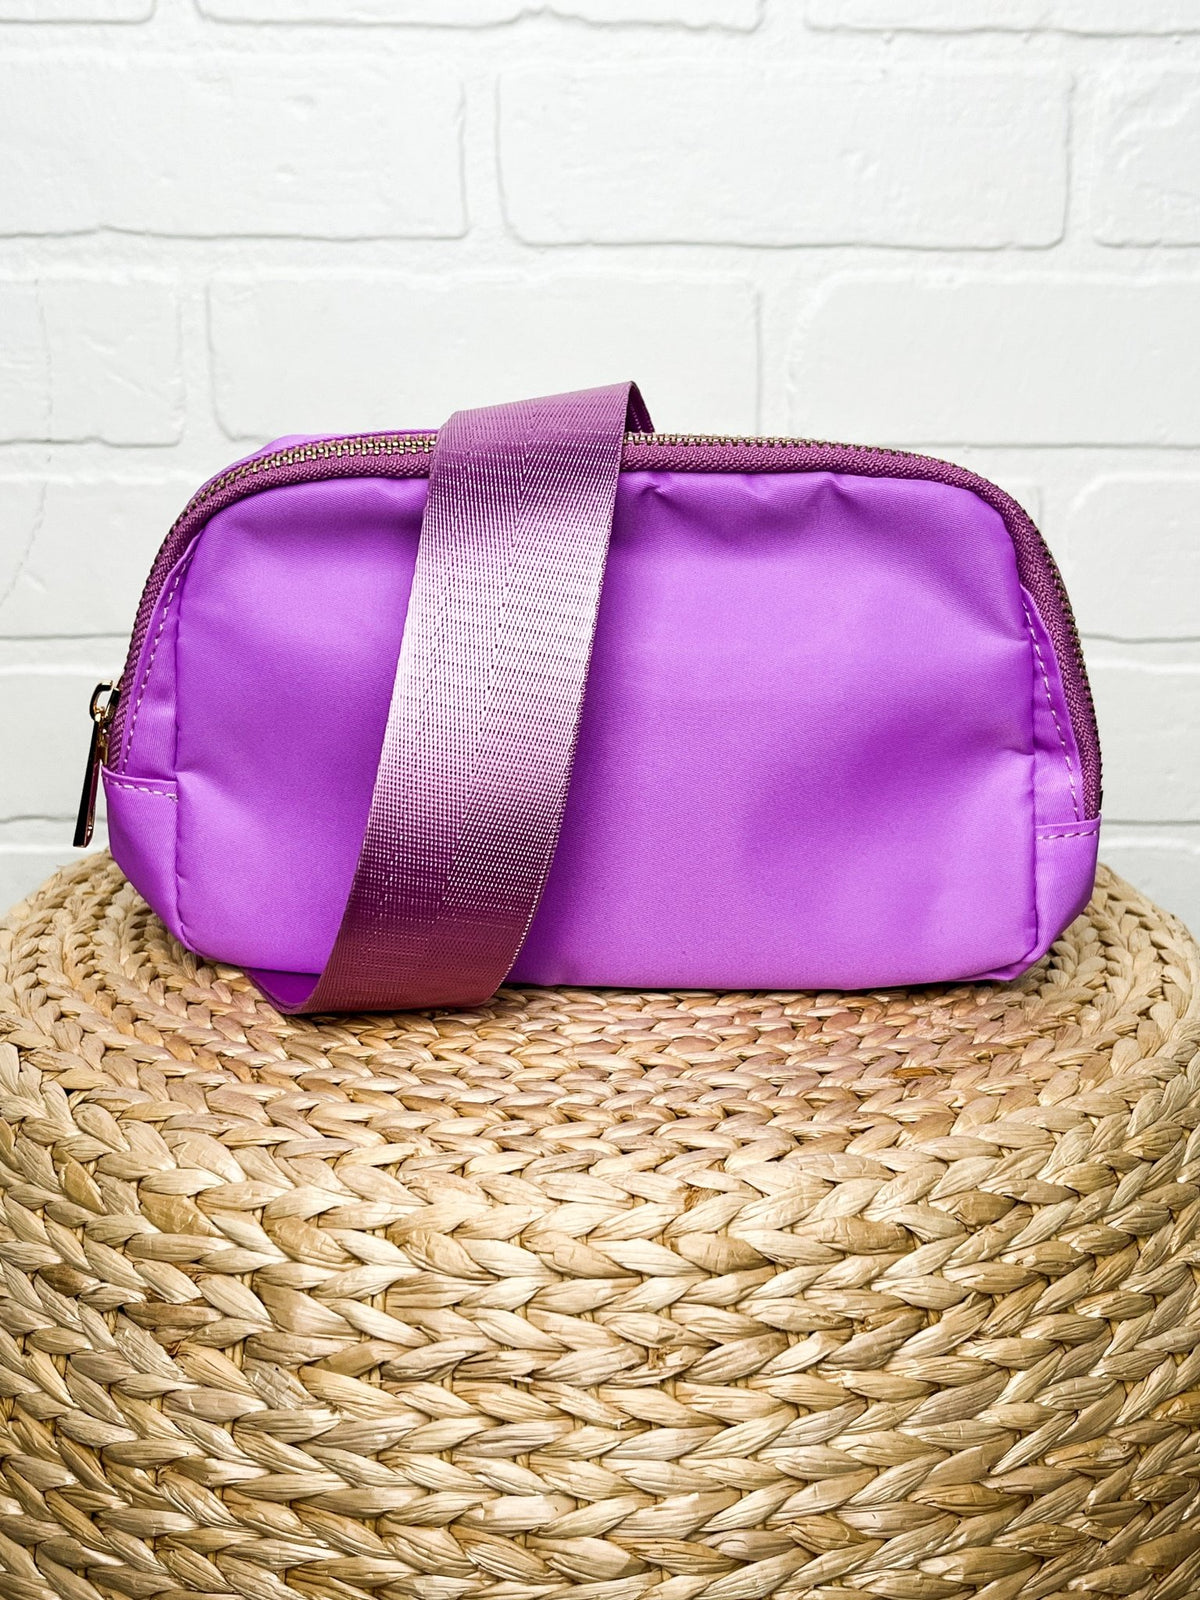 Sling belt bag lavender - Trendy Bags at Lush Fashion Lounge Boutique in Oklahoma City